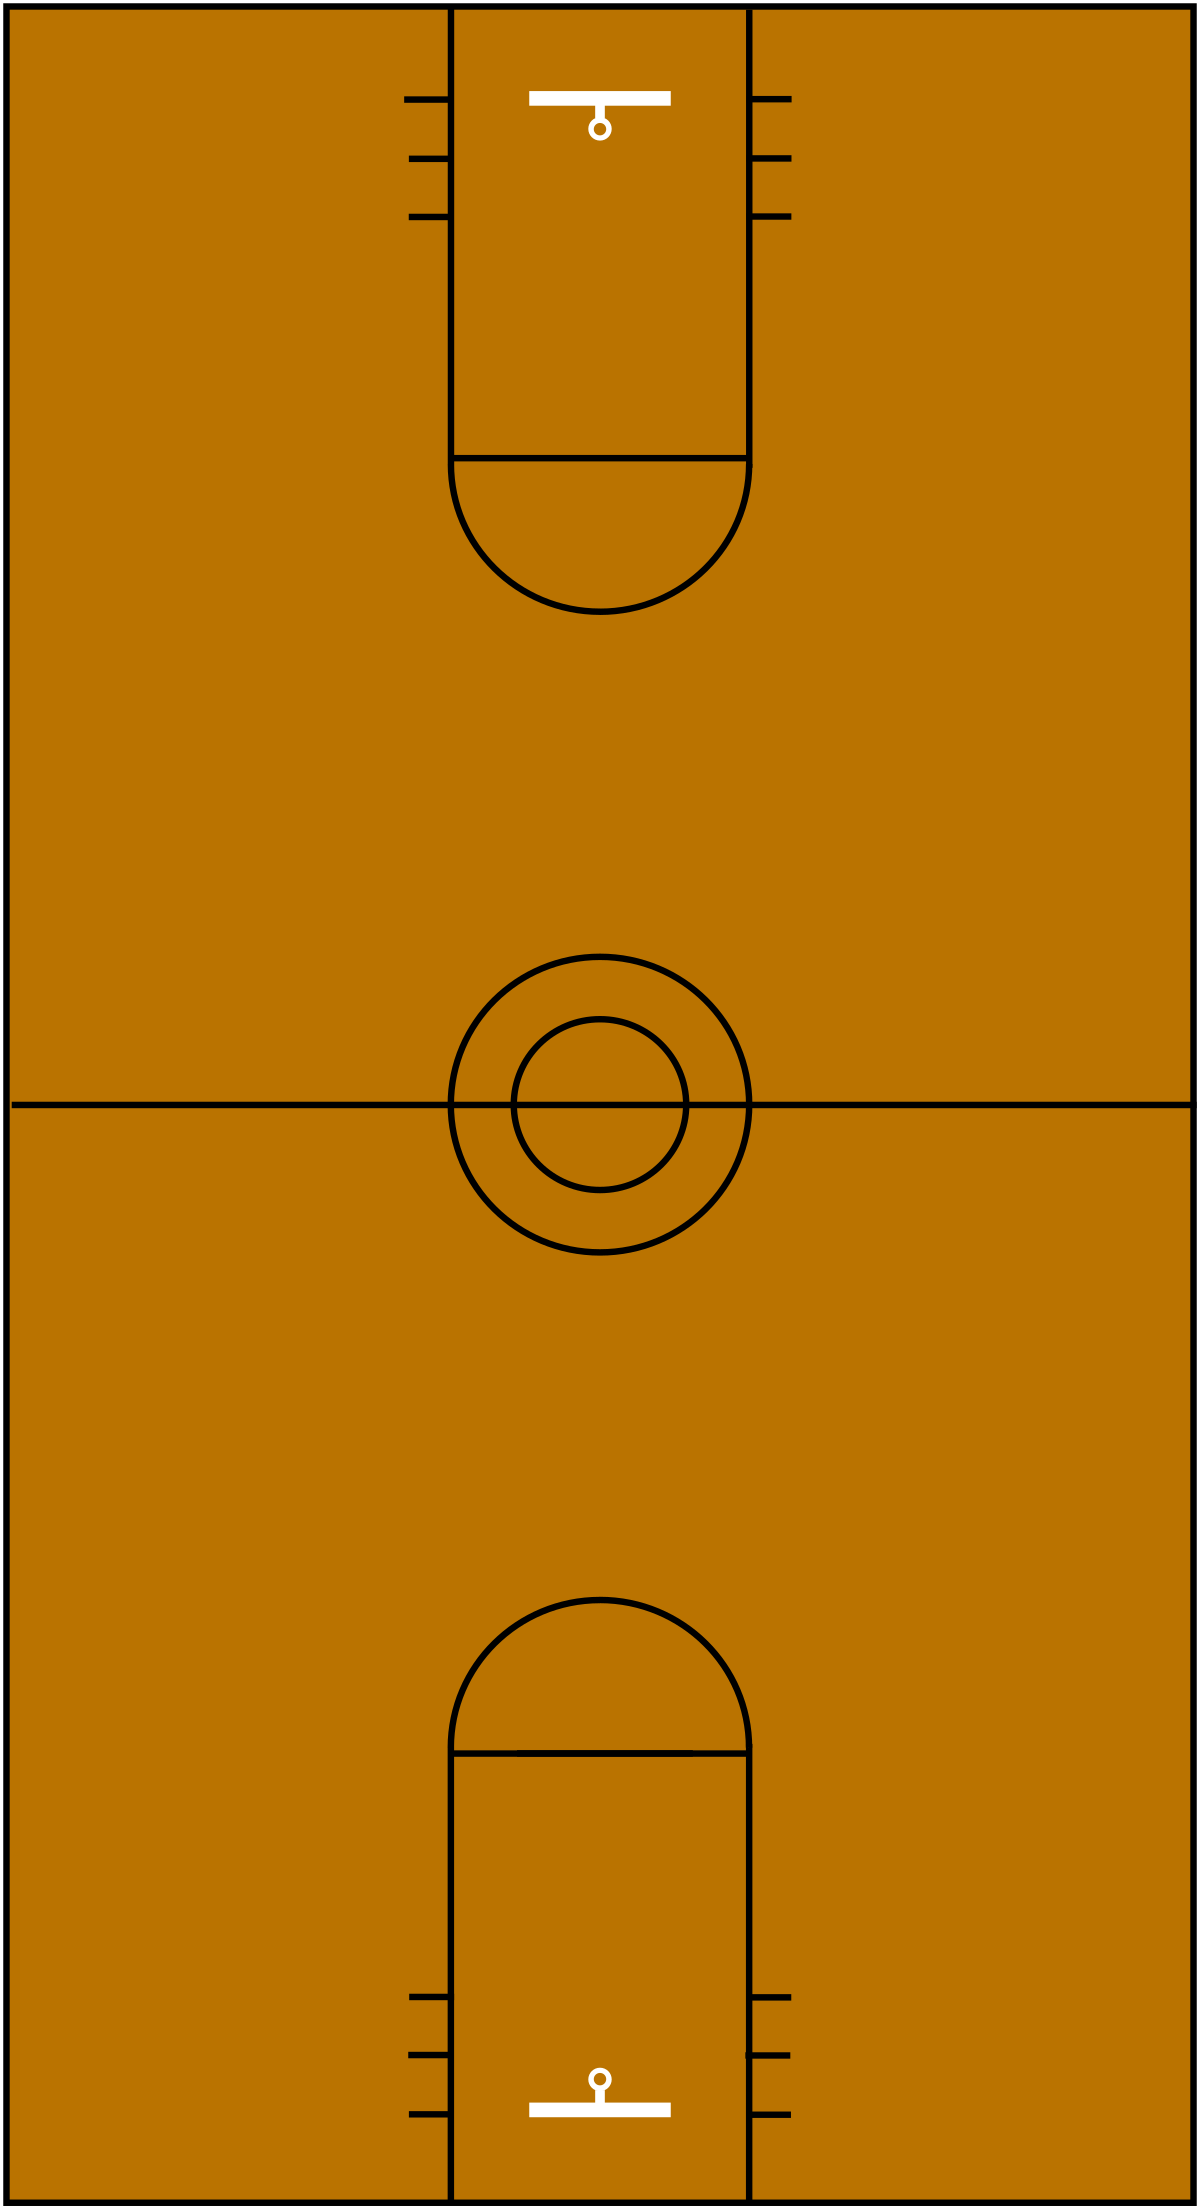 Download File:Basketball court 1952.svg - Wikimedia Commons